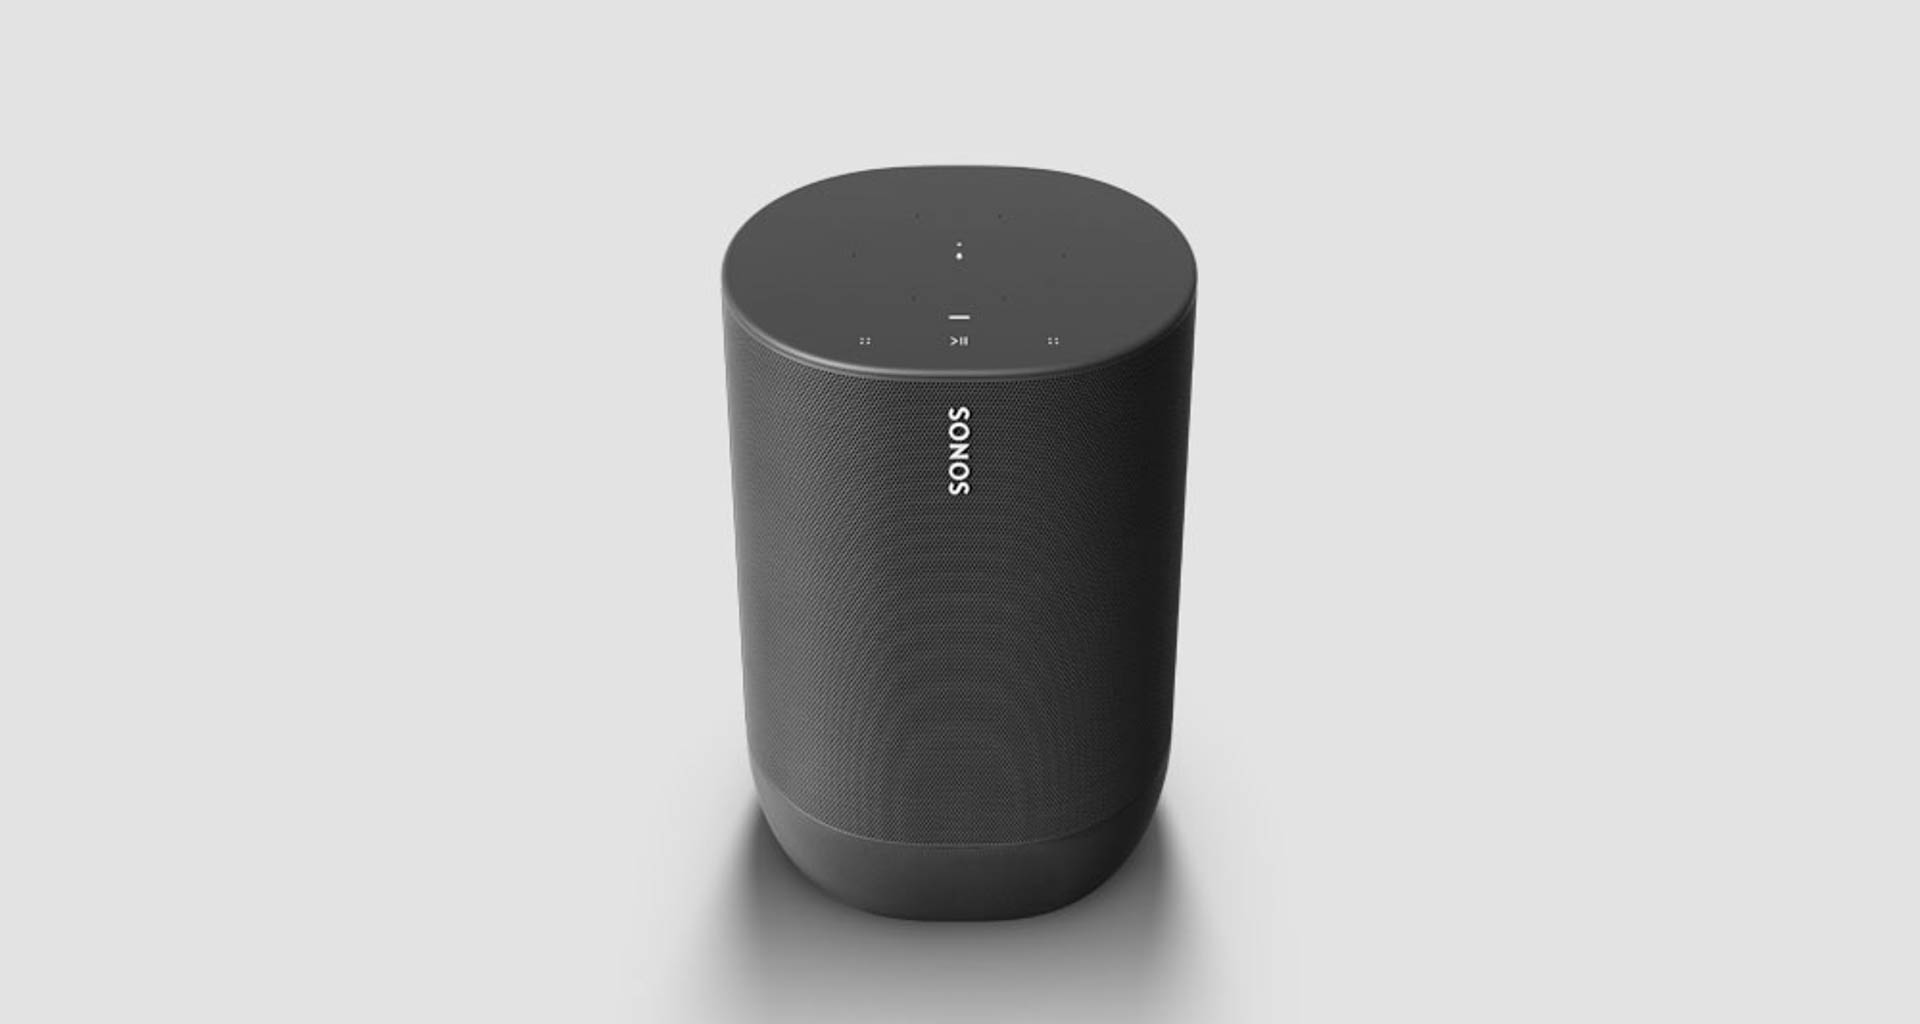 The first Sonos speaker with battery power and Bluetooth, the Sonos Move is a versatile speaker for inside or out. It's quite pricey though, at $399. Image: Sonos.